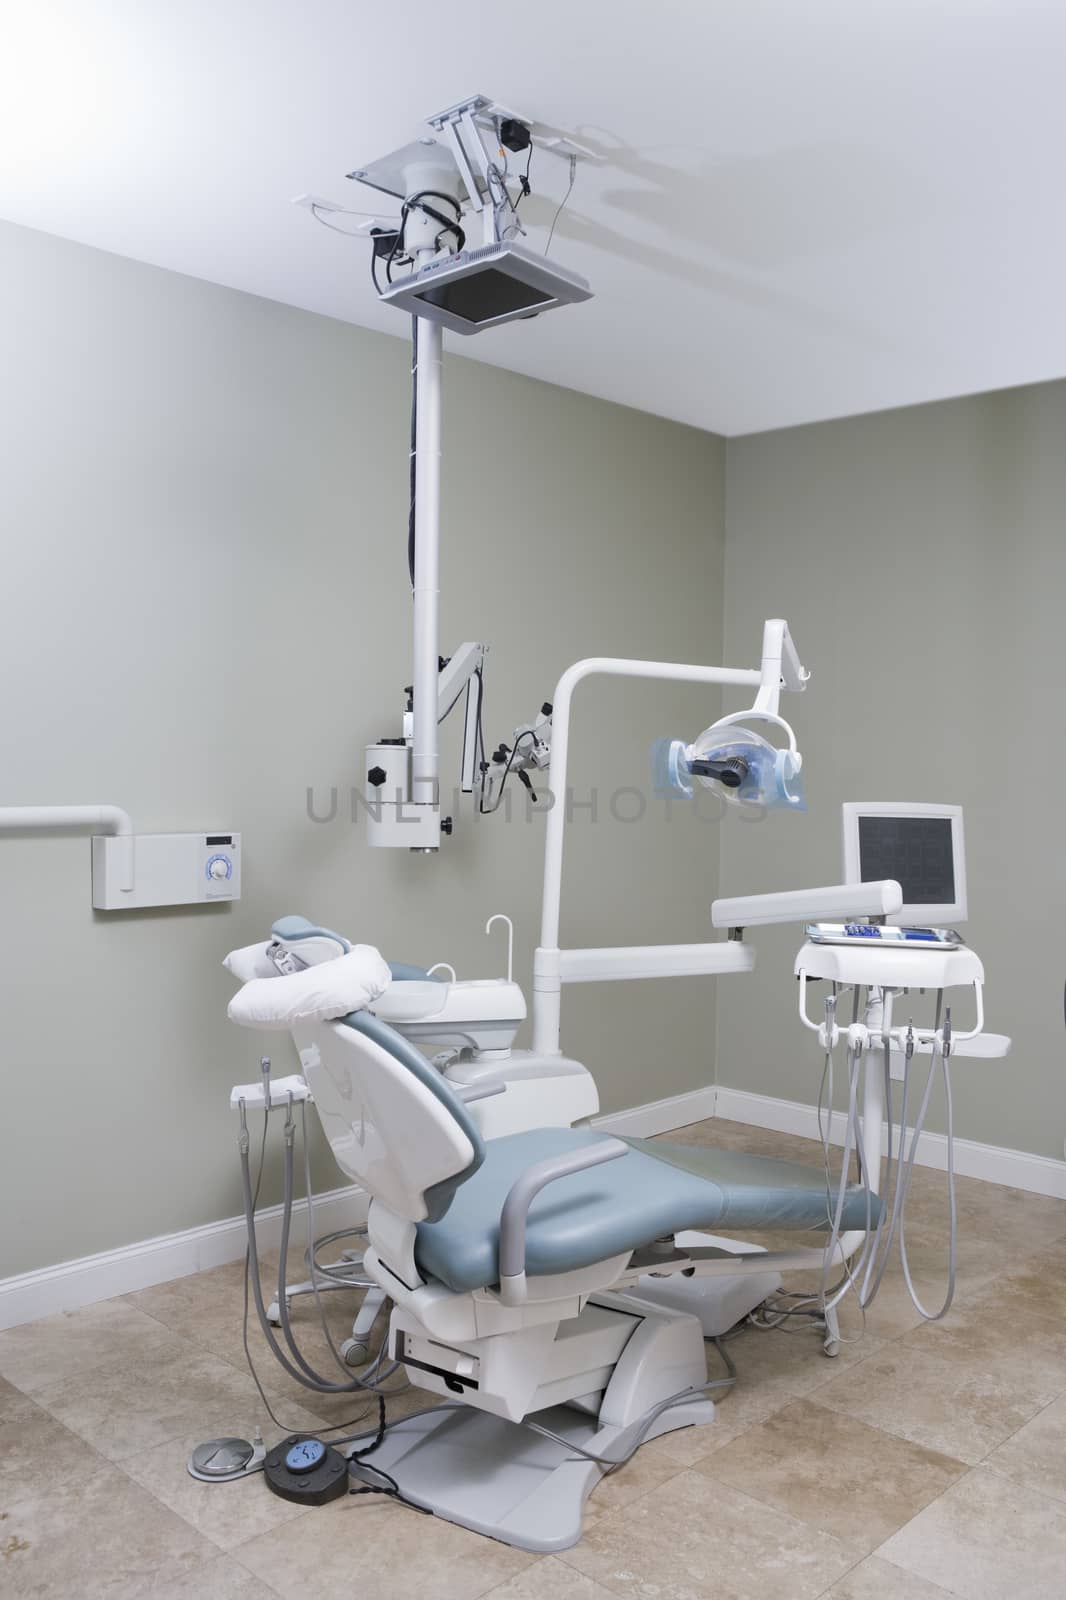 Dentist chair in dentist's office by moodboard